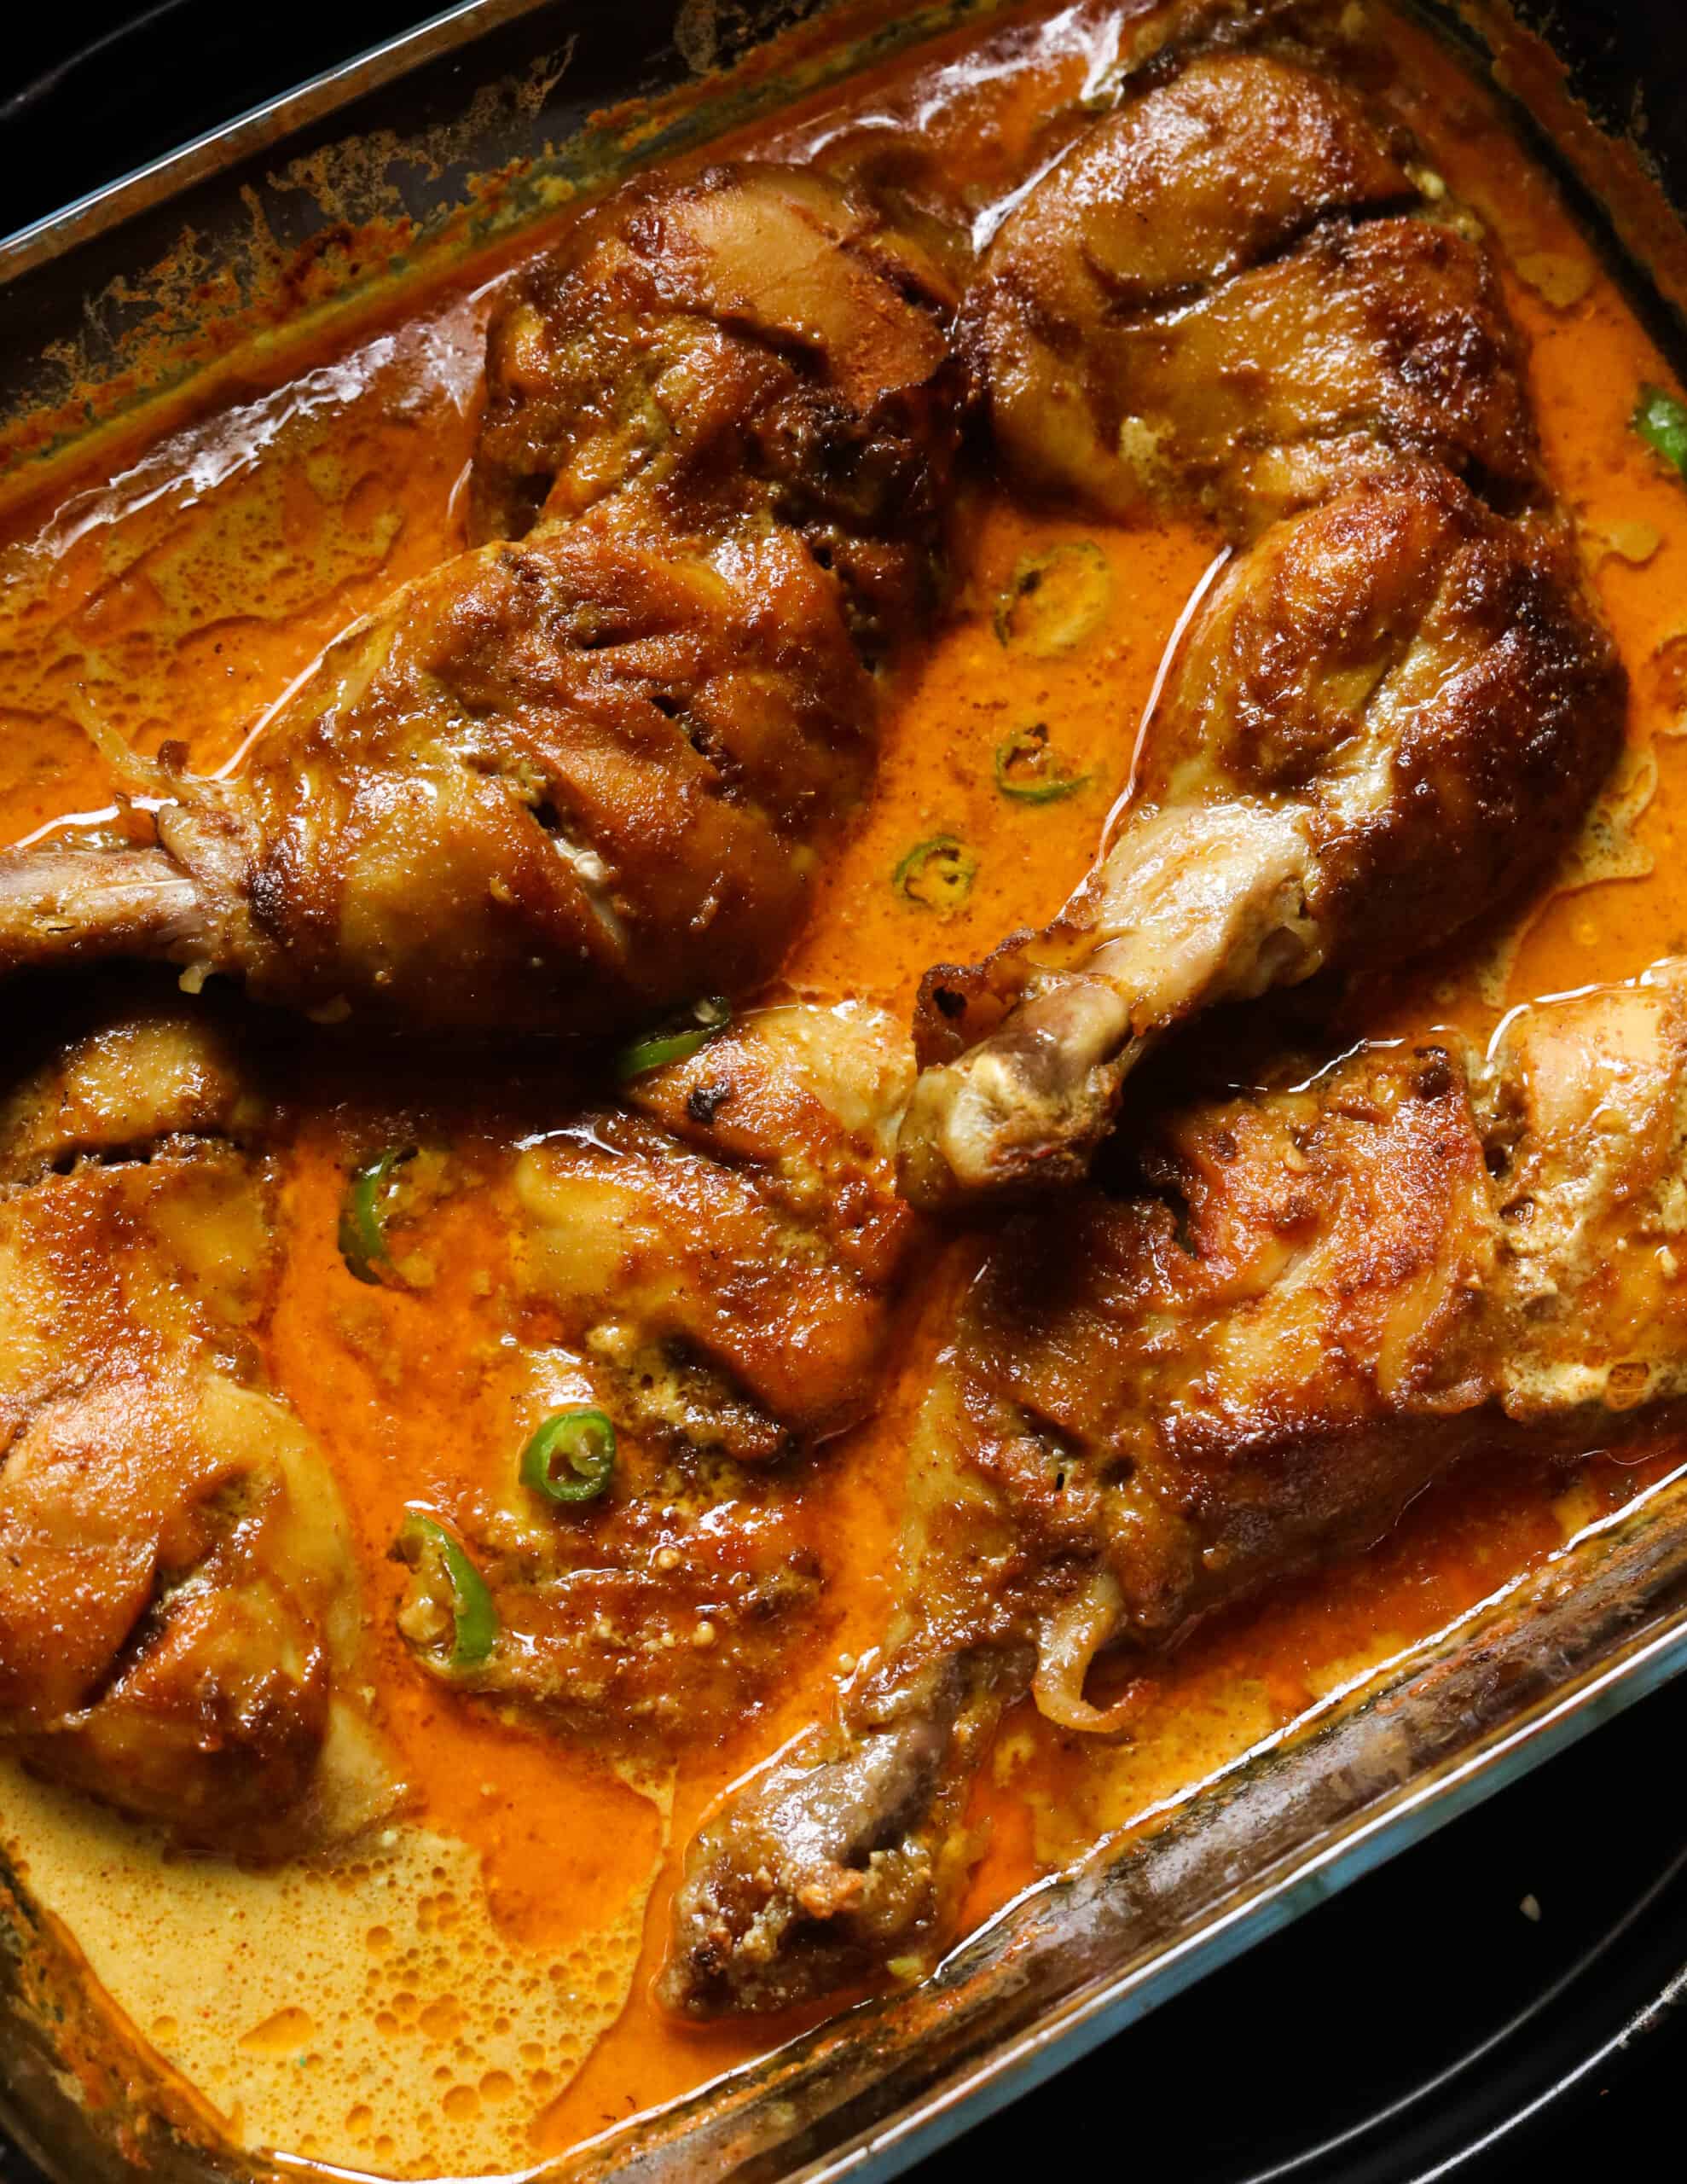 baked curry chicken served in a dish.